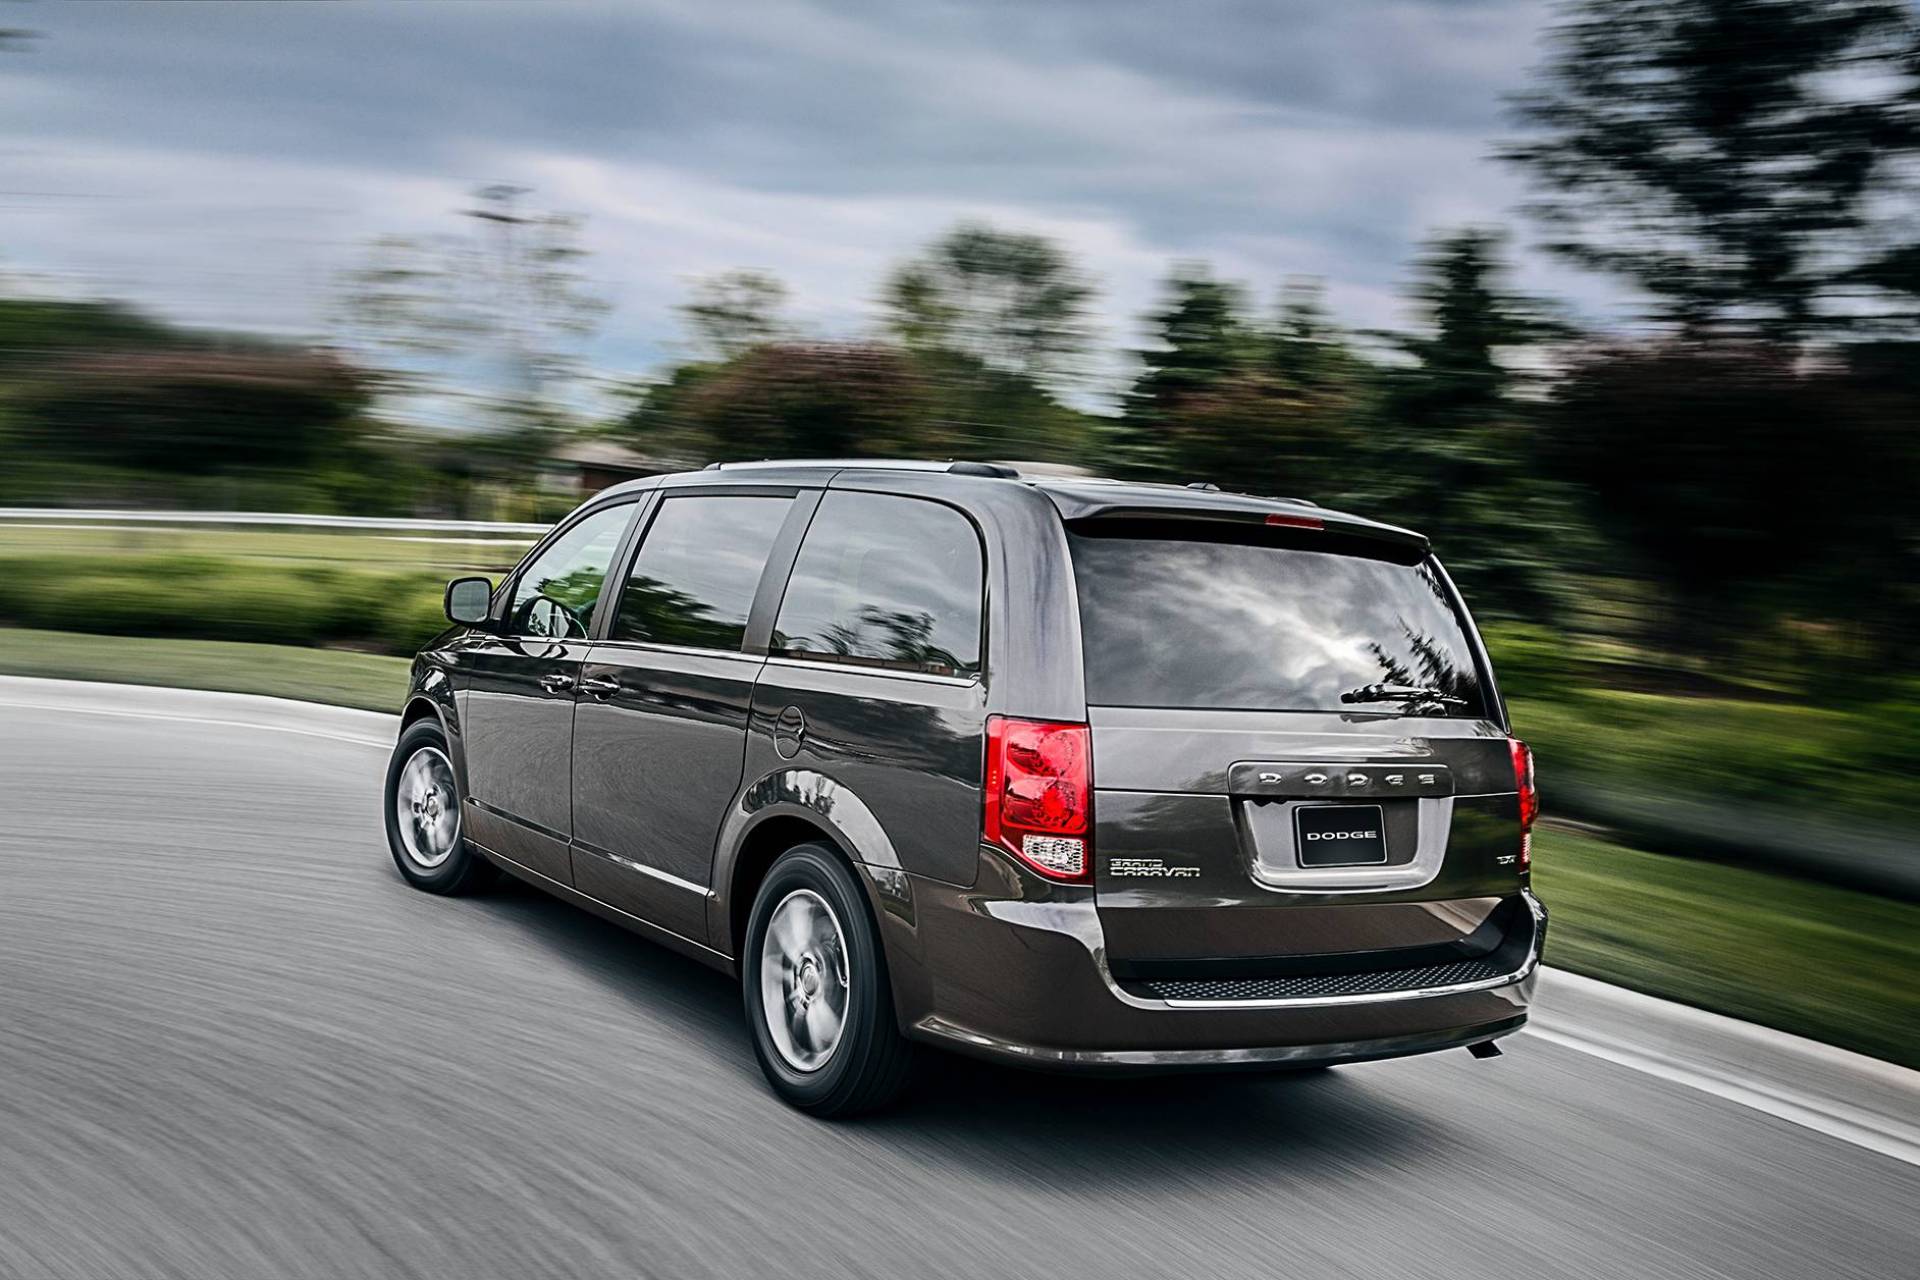 2020 Chrysler Voyager To Push Dodge Grand Caravan Out Of Production In